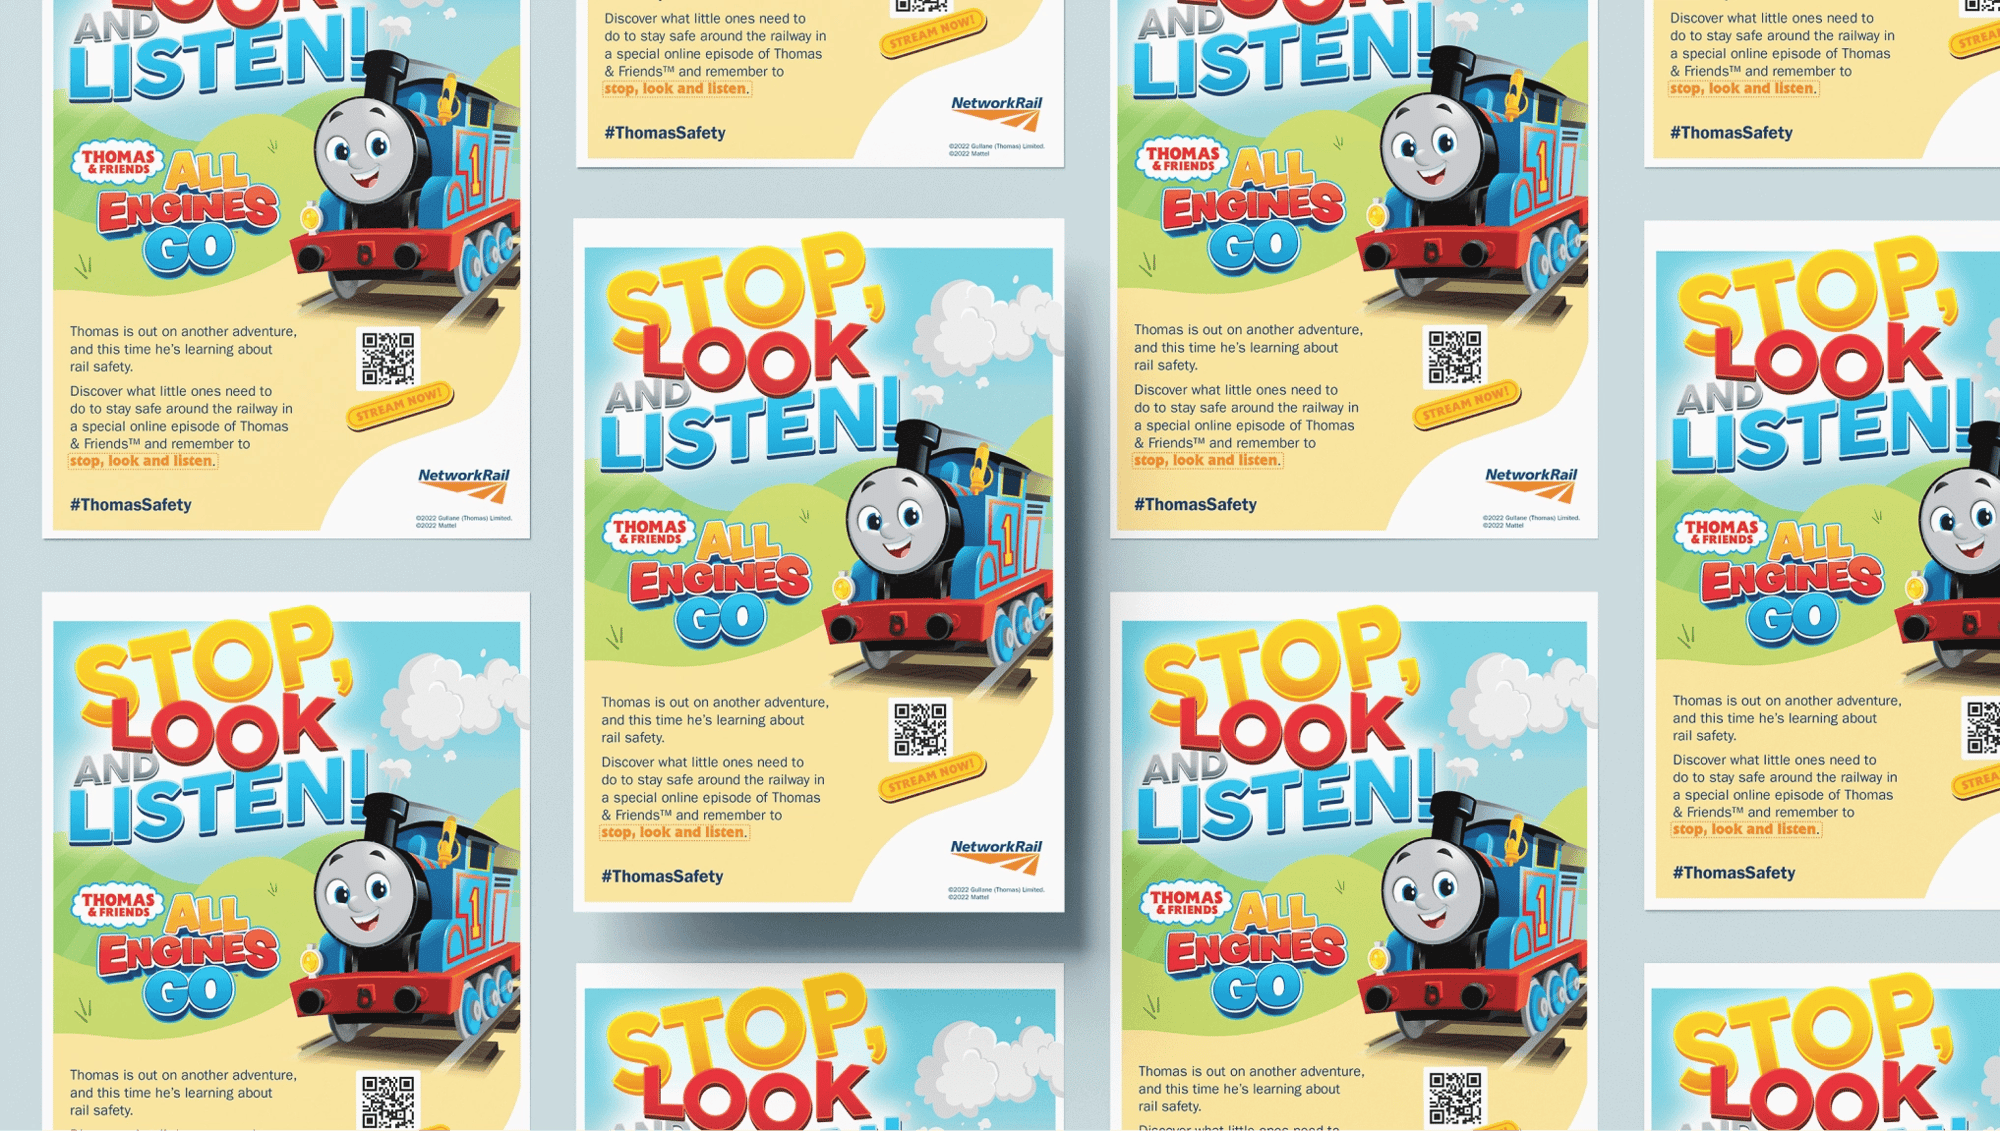 Mock ups of the stop look and listen posters we designed.